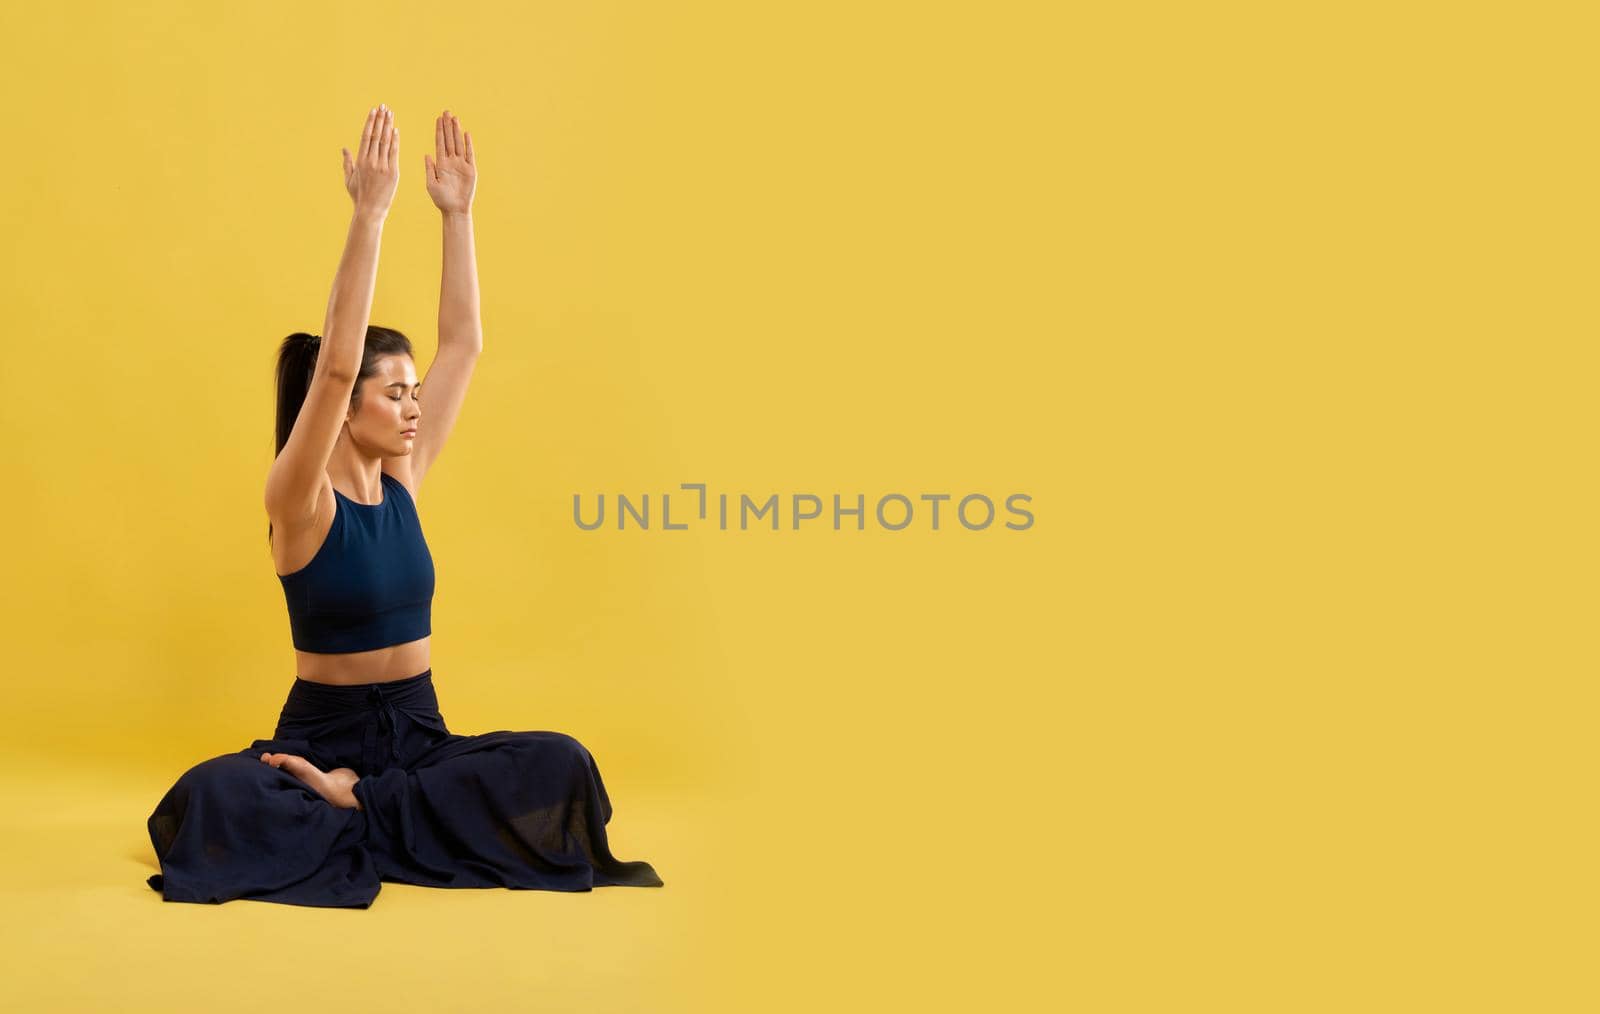 Calm girl meditating, with closed eyes alone on floor. Front view of female in black top sitting in lotus pose with gazed up hands, isolated on orange studio background, copy space. Concept of yoga.